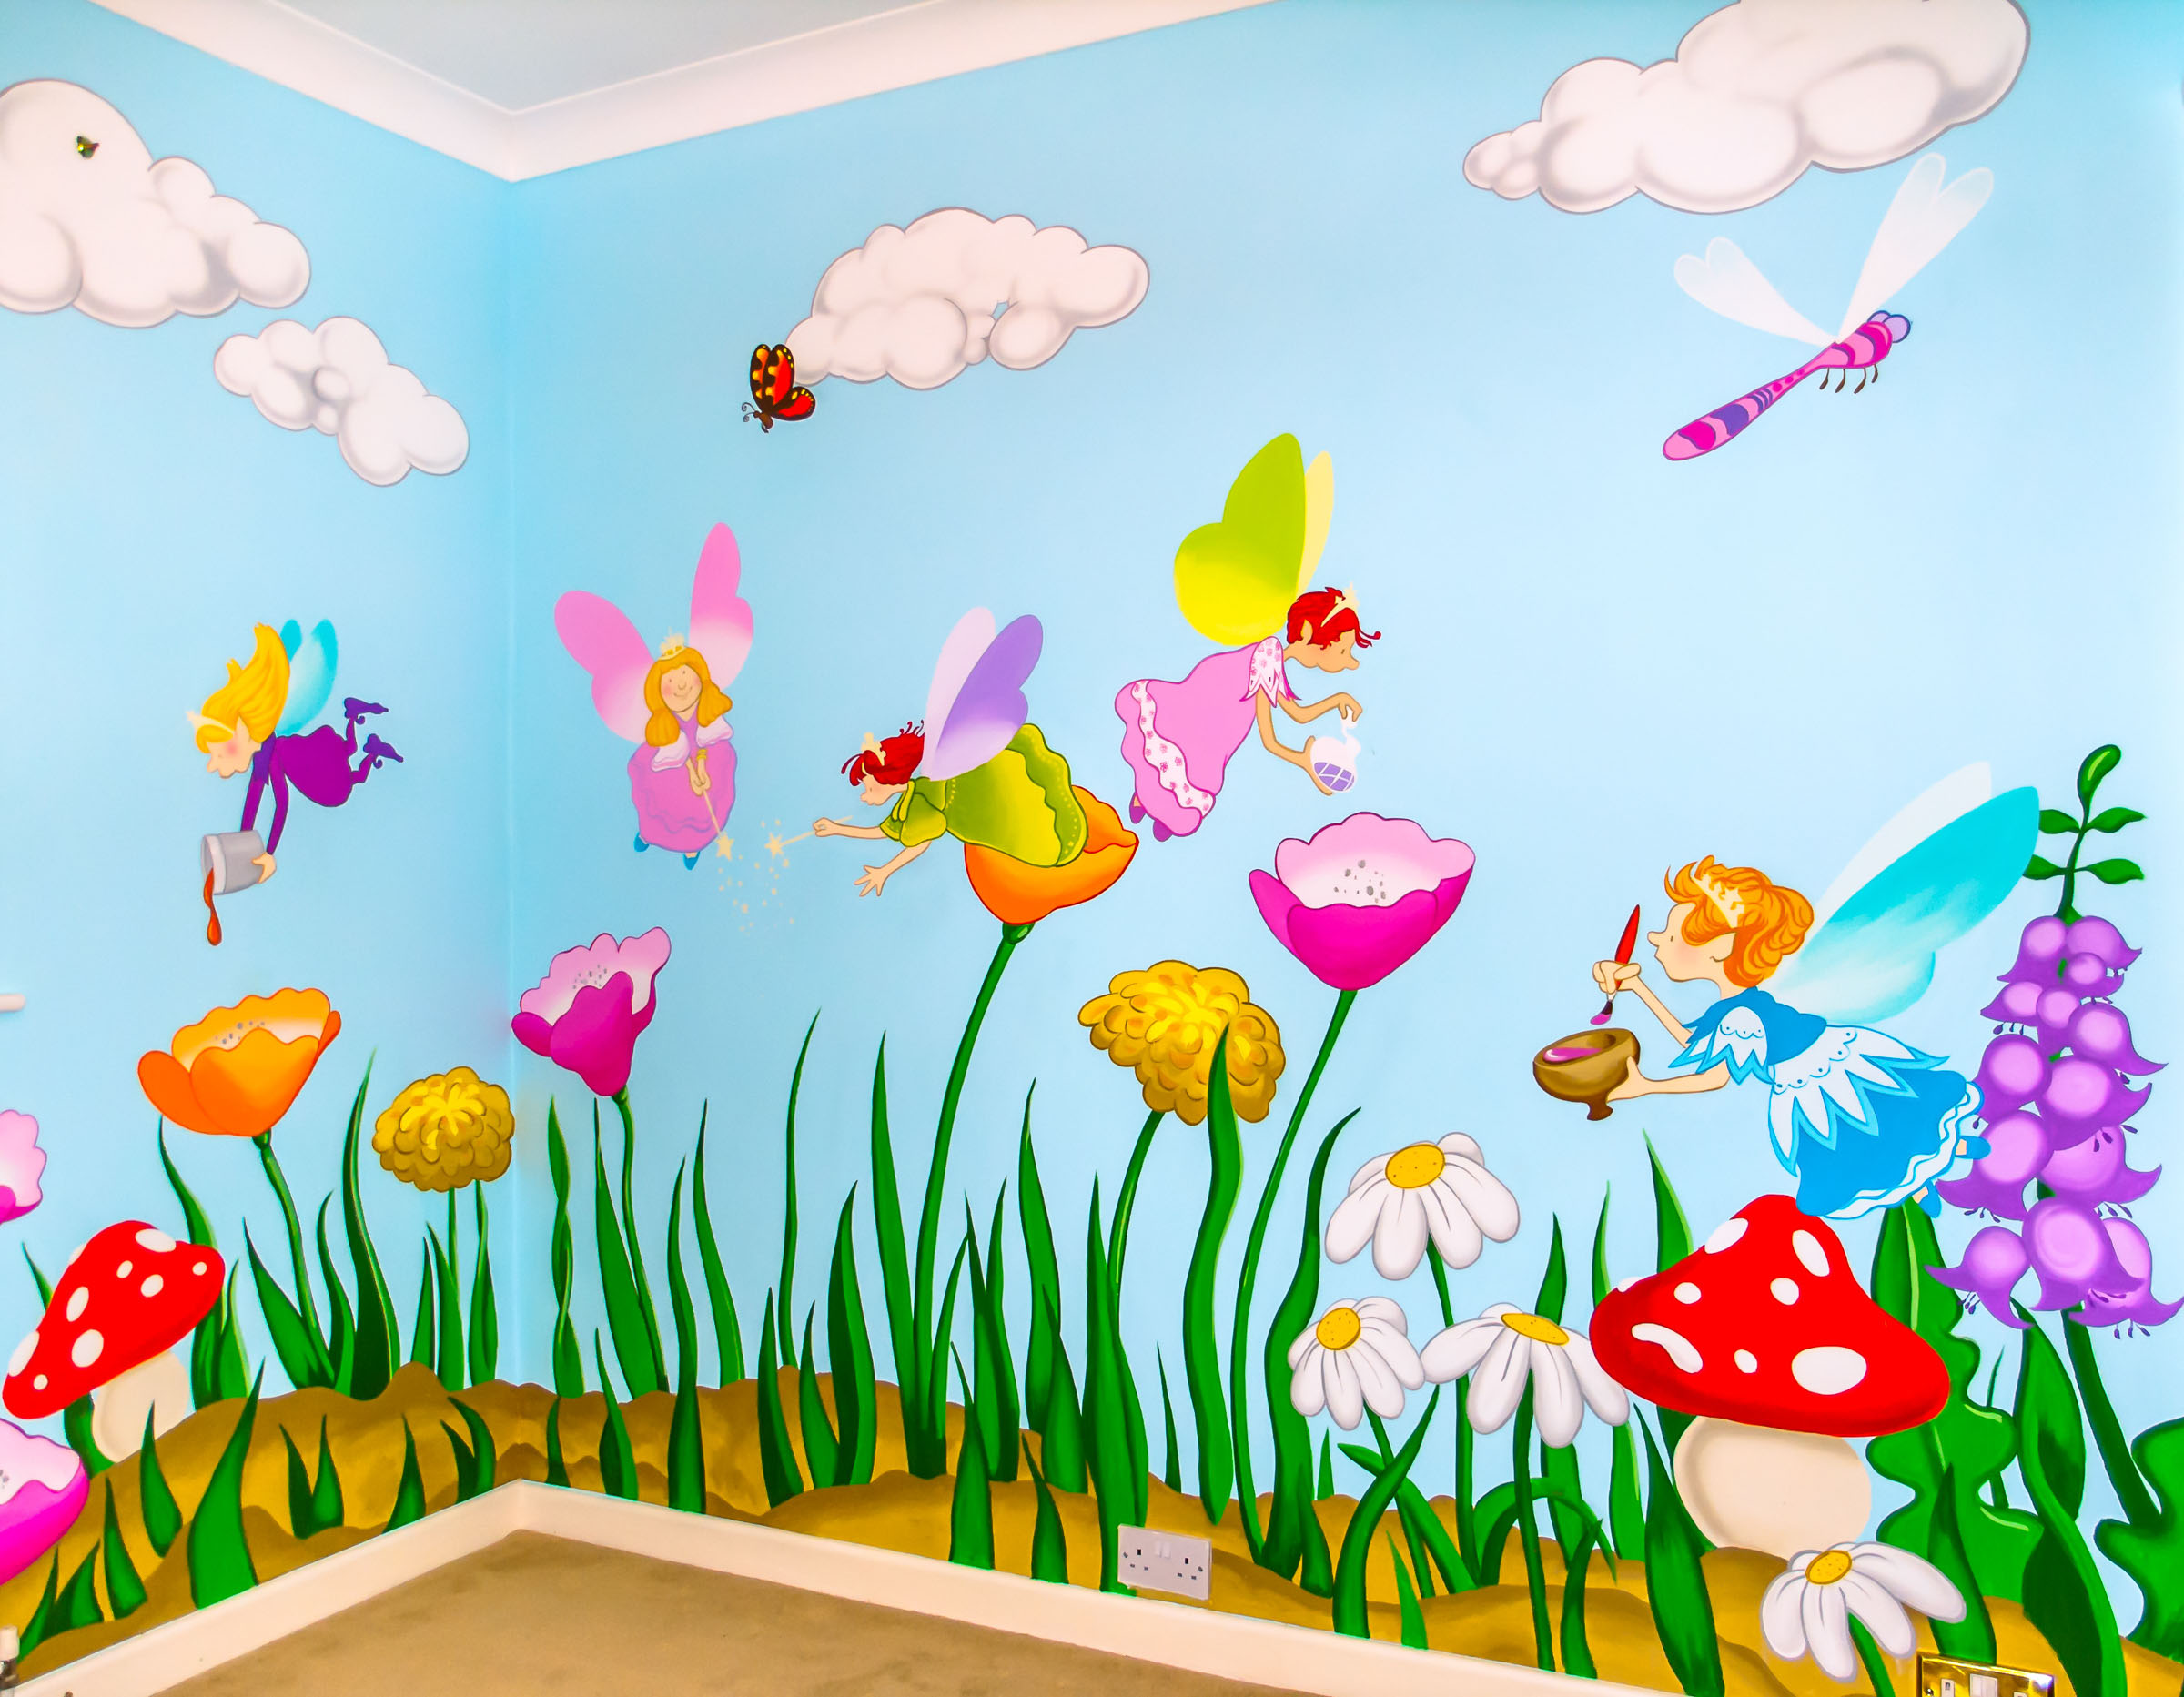 Cute colourful fairies wall mural, with flowers and mushrooms